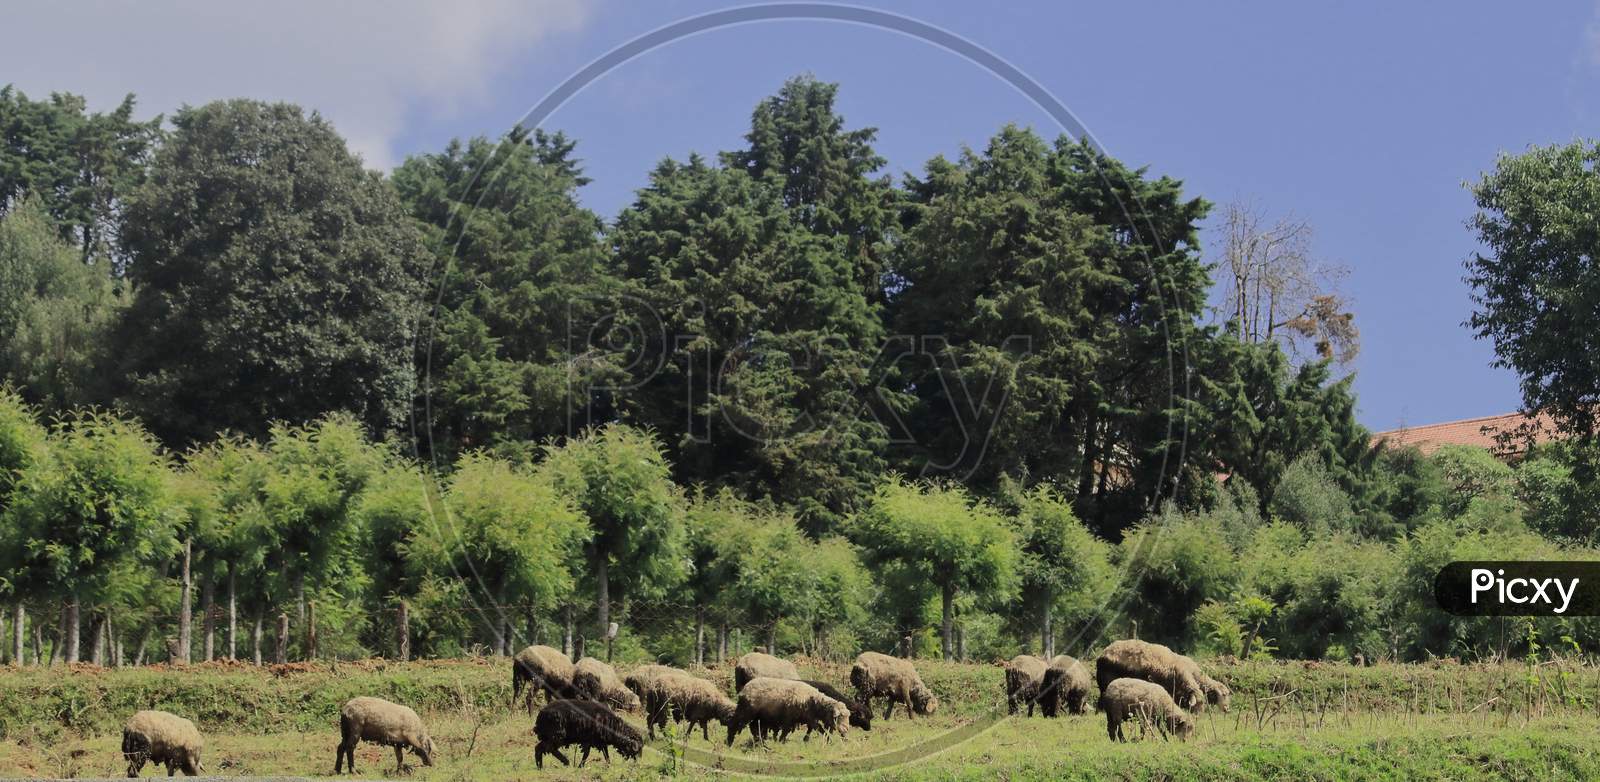 flock of sheep grazing on the foothills of nilgiri mountains at ooty hill station in tamilnadu, india